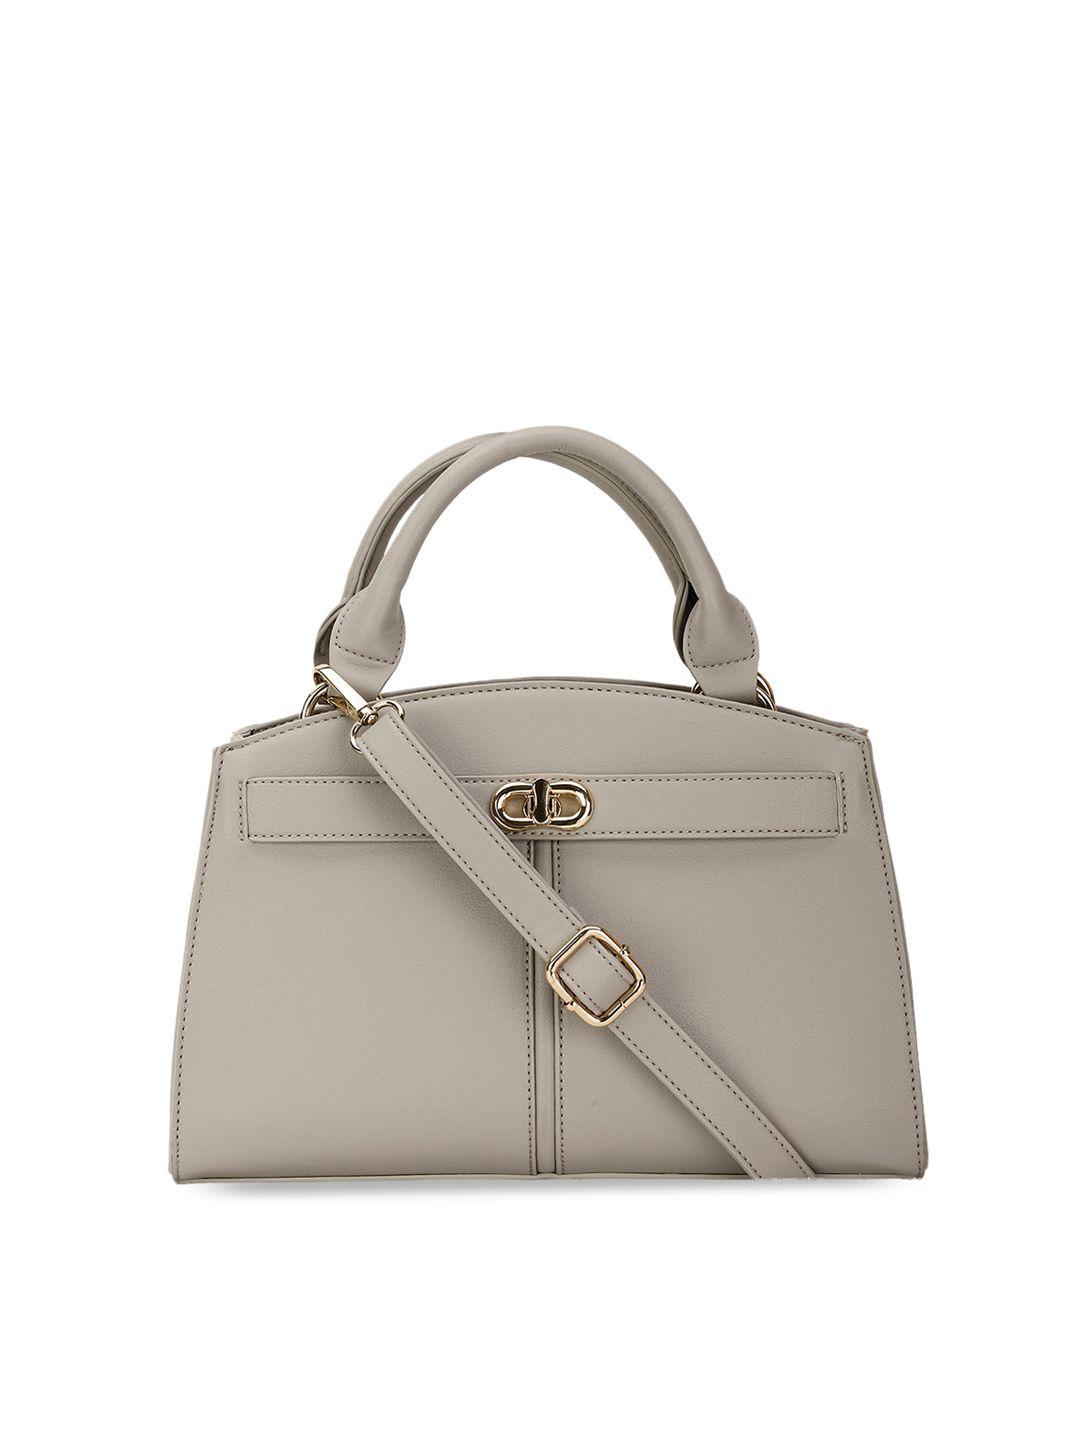 marie claire grey structured handheld bag